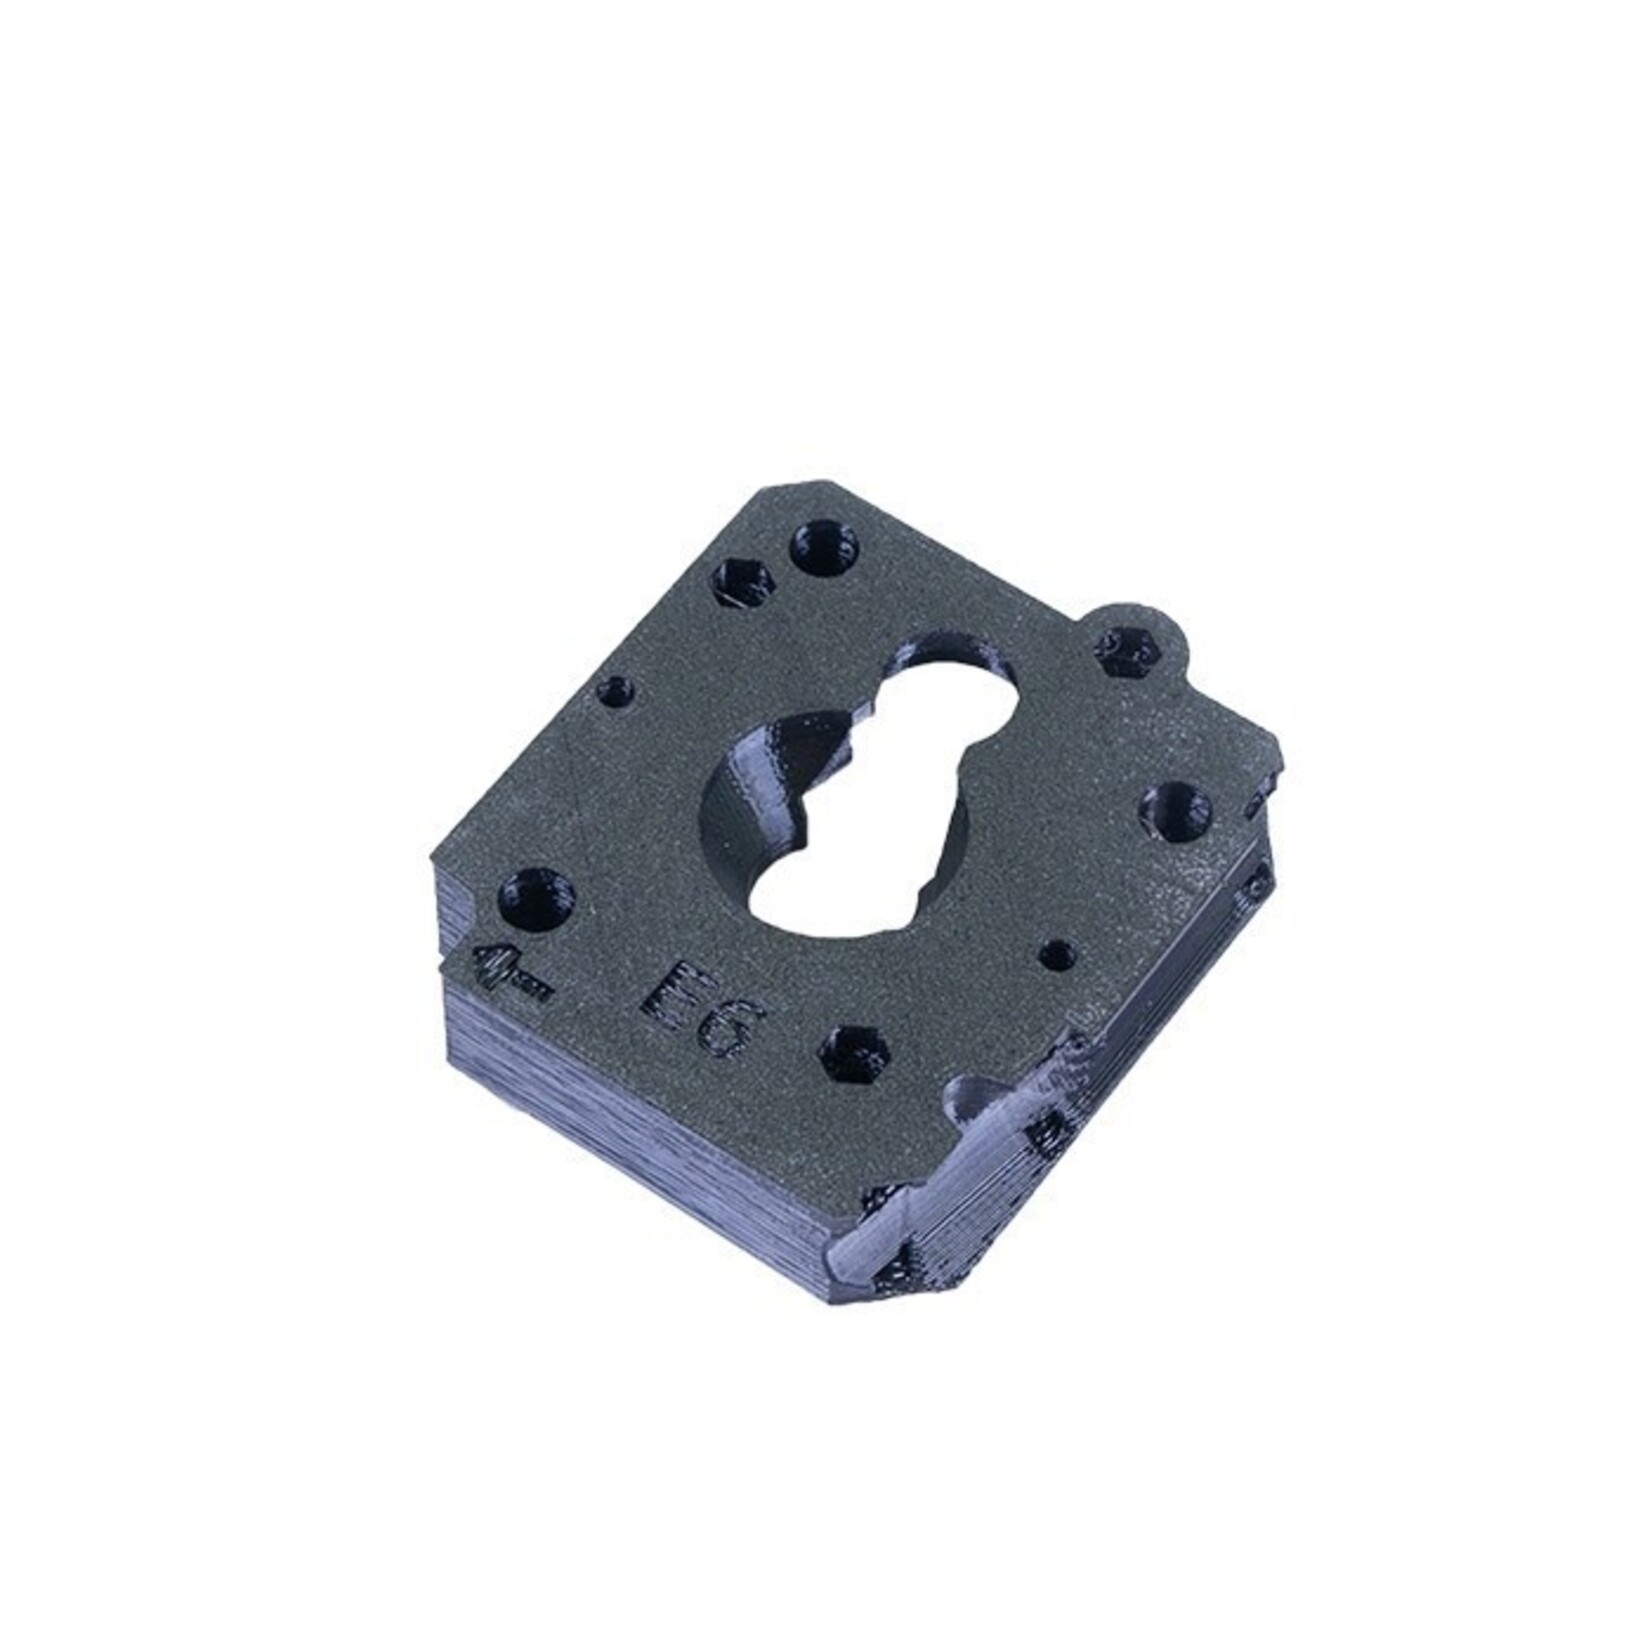 Prusa Research MINI EXTRUDER FRONT BLACK